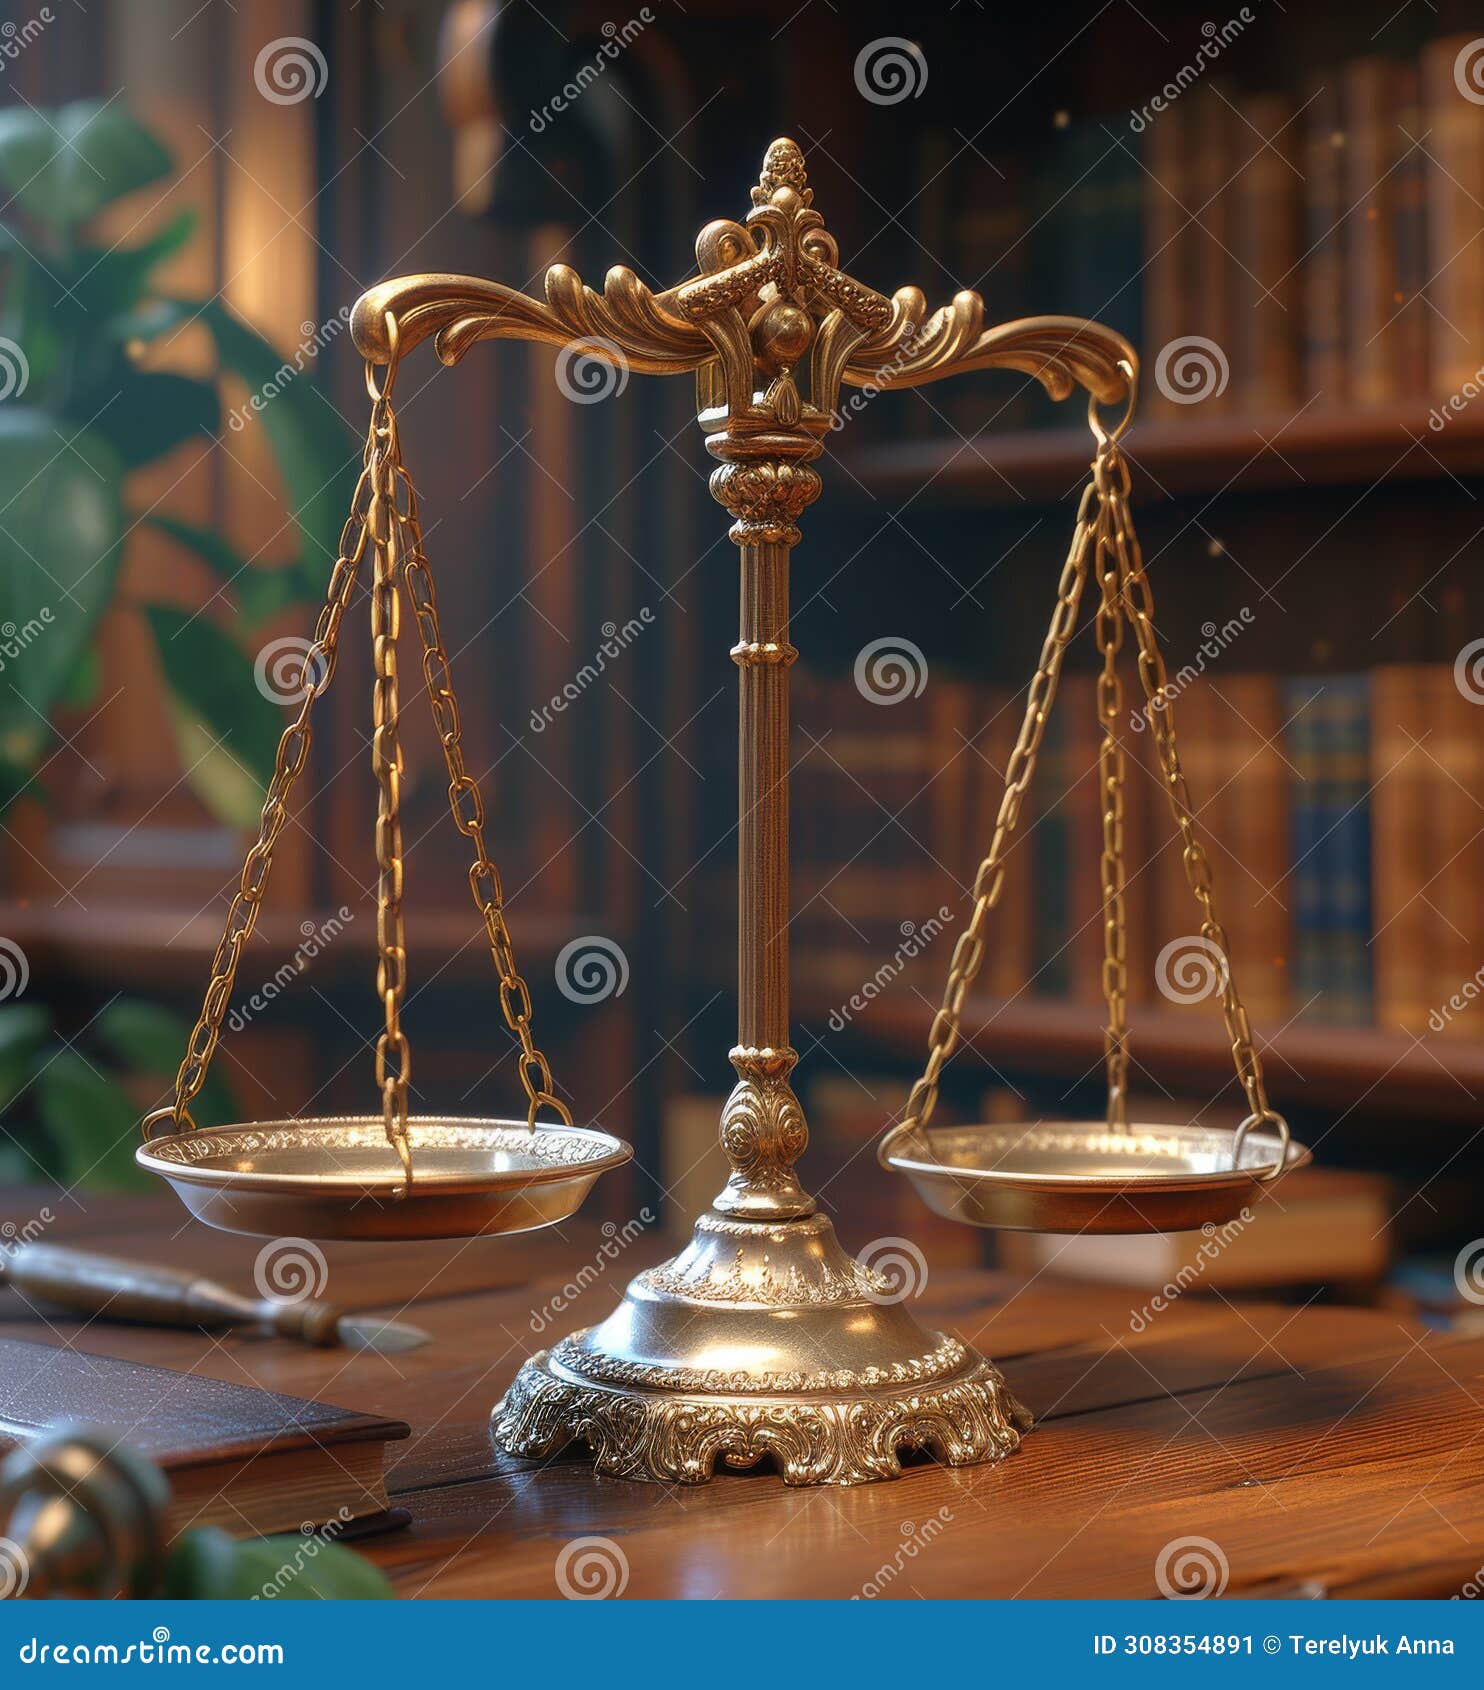 scales of justice on desk in the library